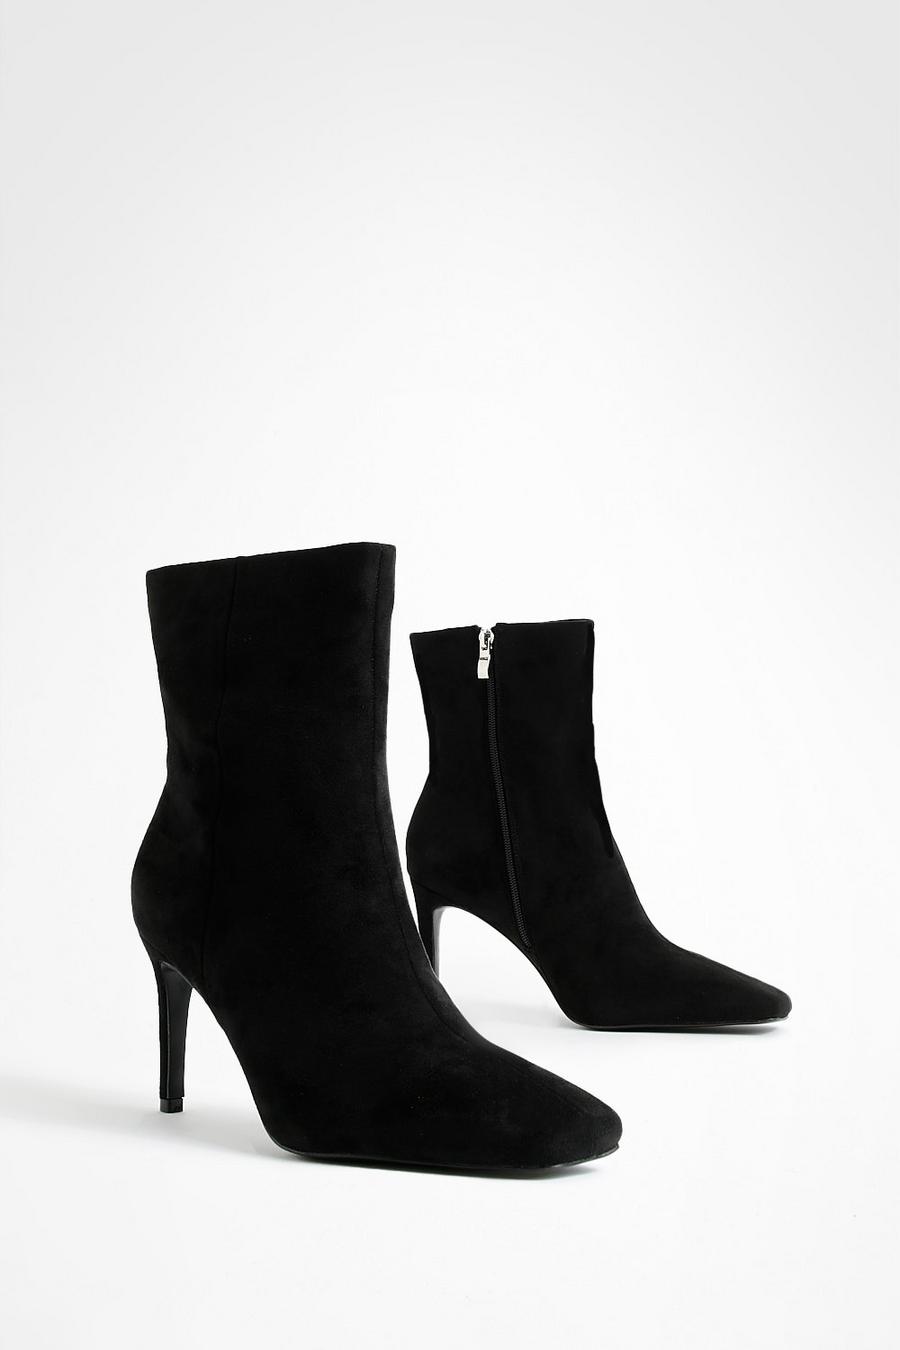 Black Wide Width Square Toe Stiletto Ankle Boots